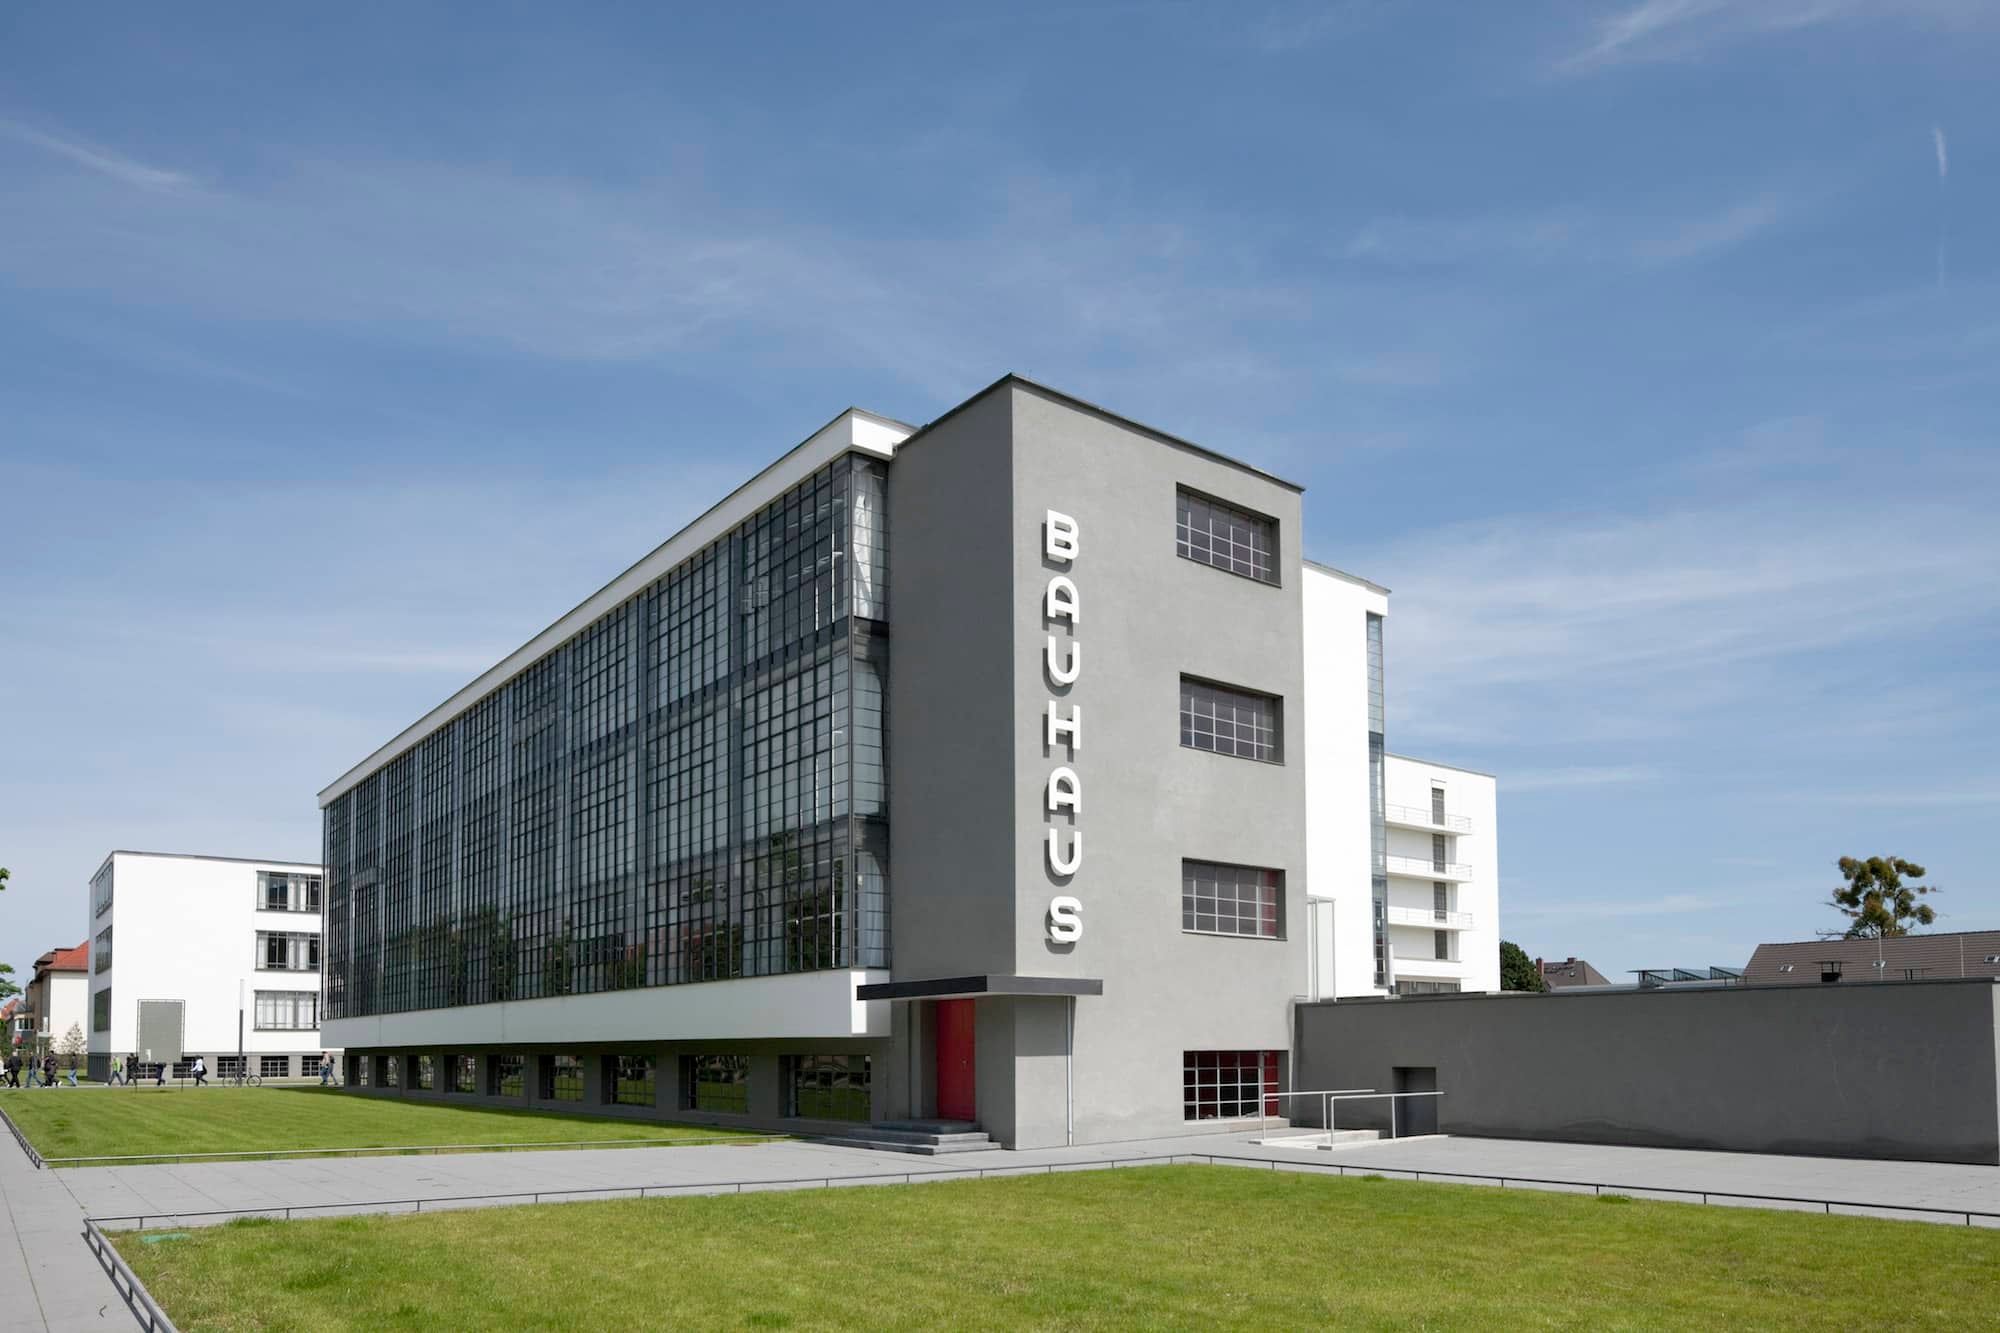 A Walking Tour of Dessau, the Capital of the Bauhaus | The ...
